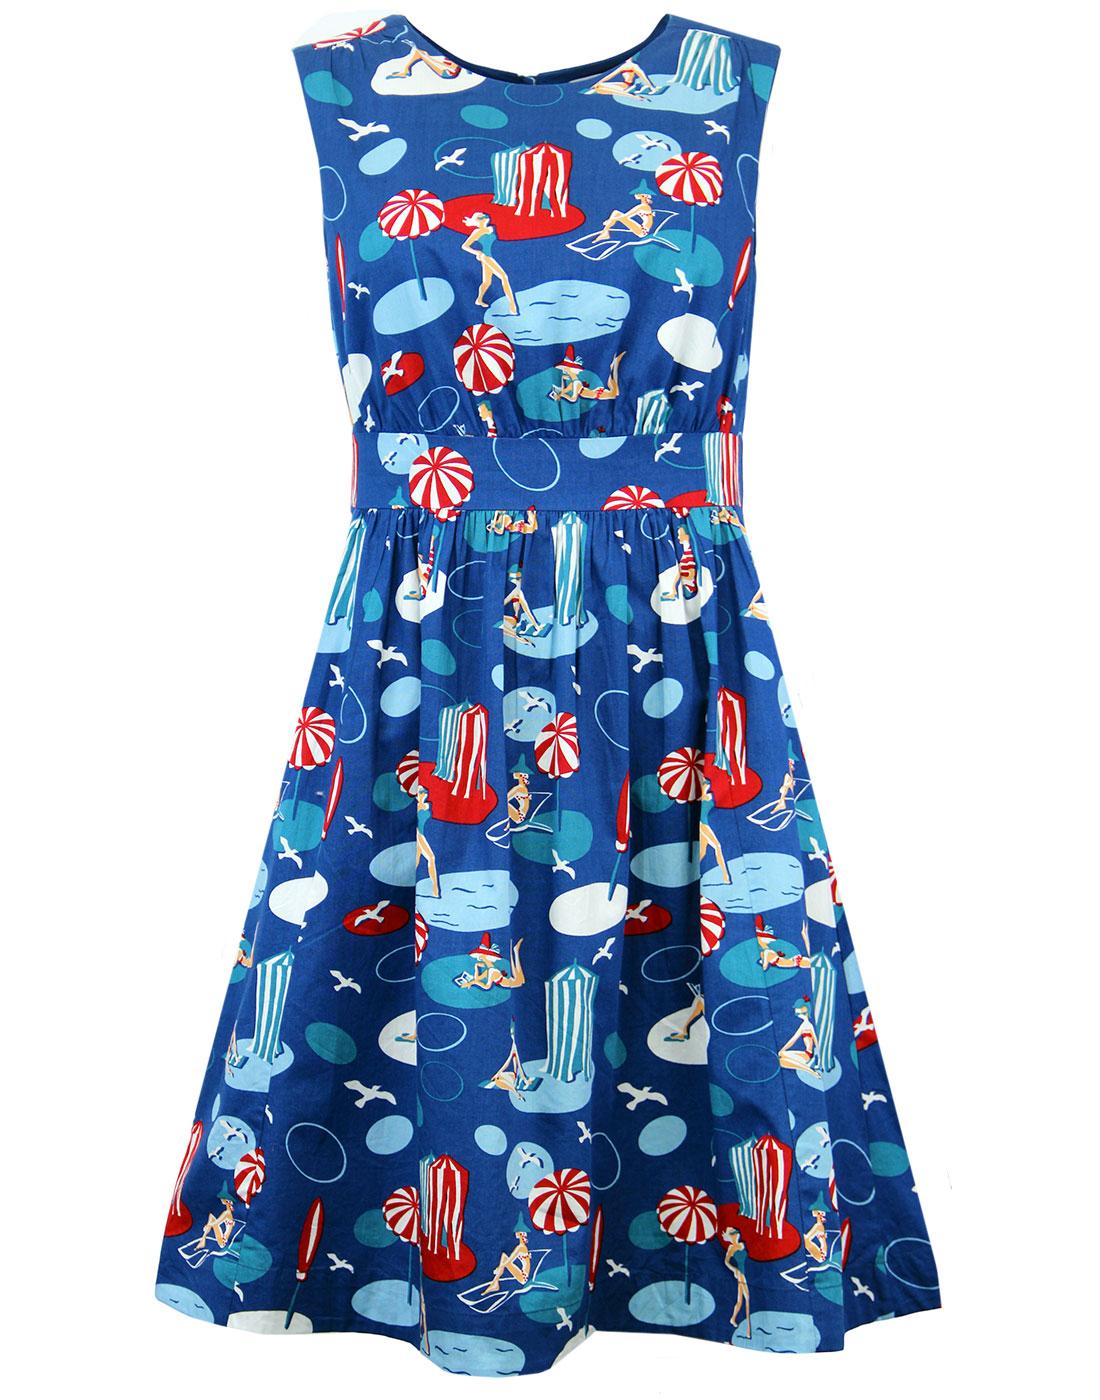 Lucy EMILY AND FIN Retro 50s Vintage Seaside Dress